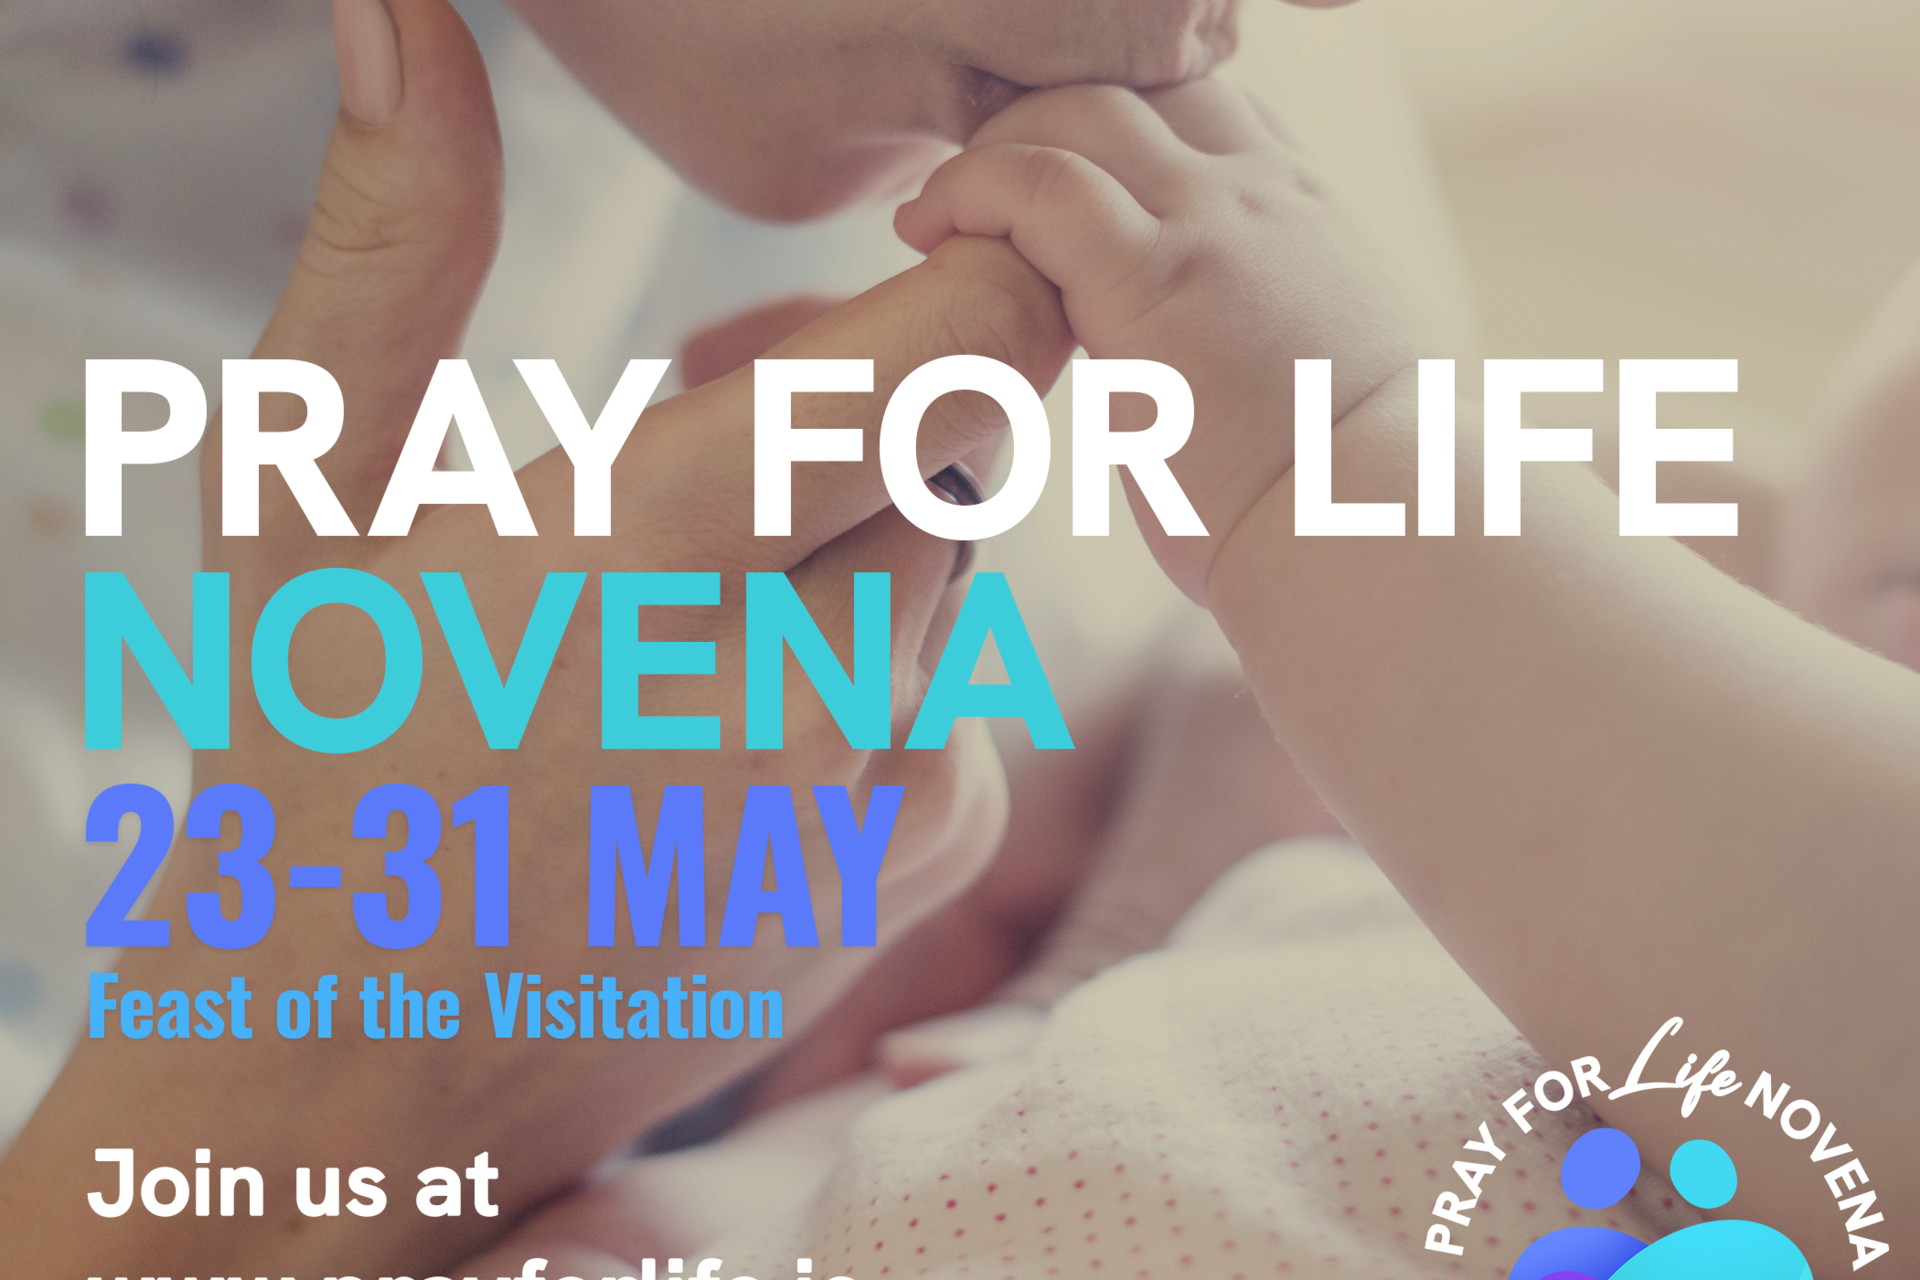 Bishops launch nine days of Prayer for Life